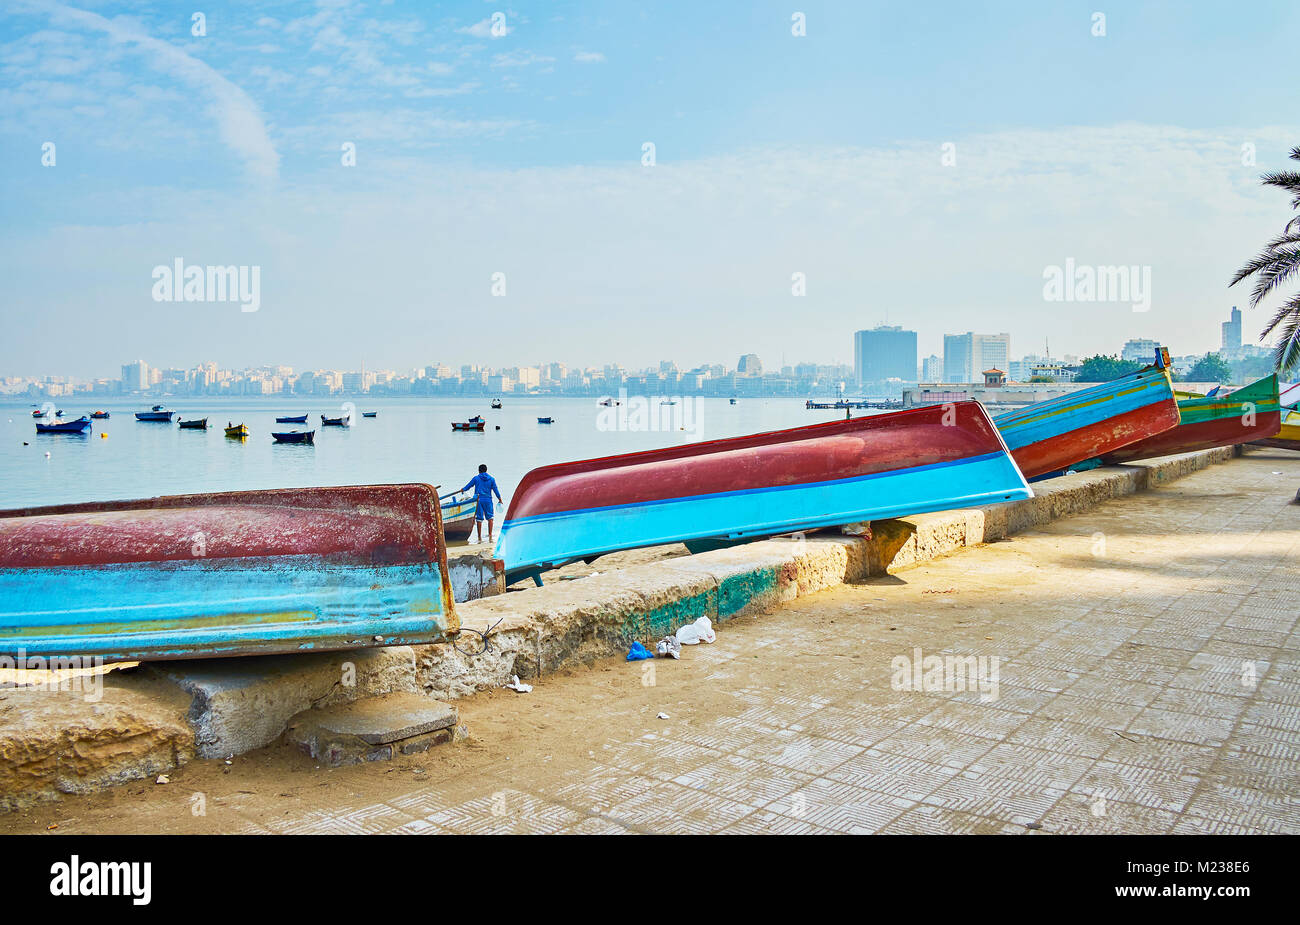 The row of upside down boats along the Eastern Harbor at Corniche promenade of Alexandria, Egypt. Stock Photo